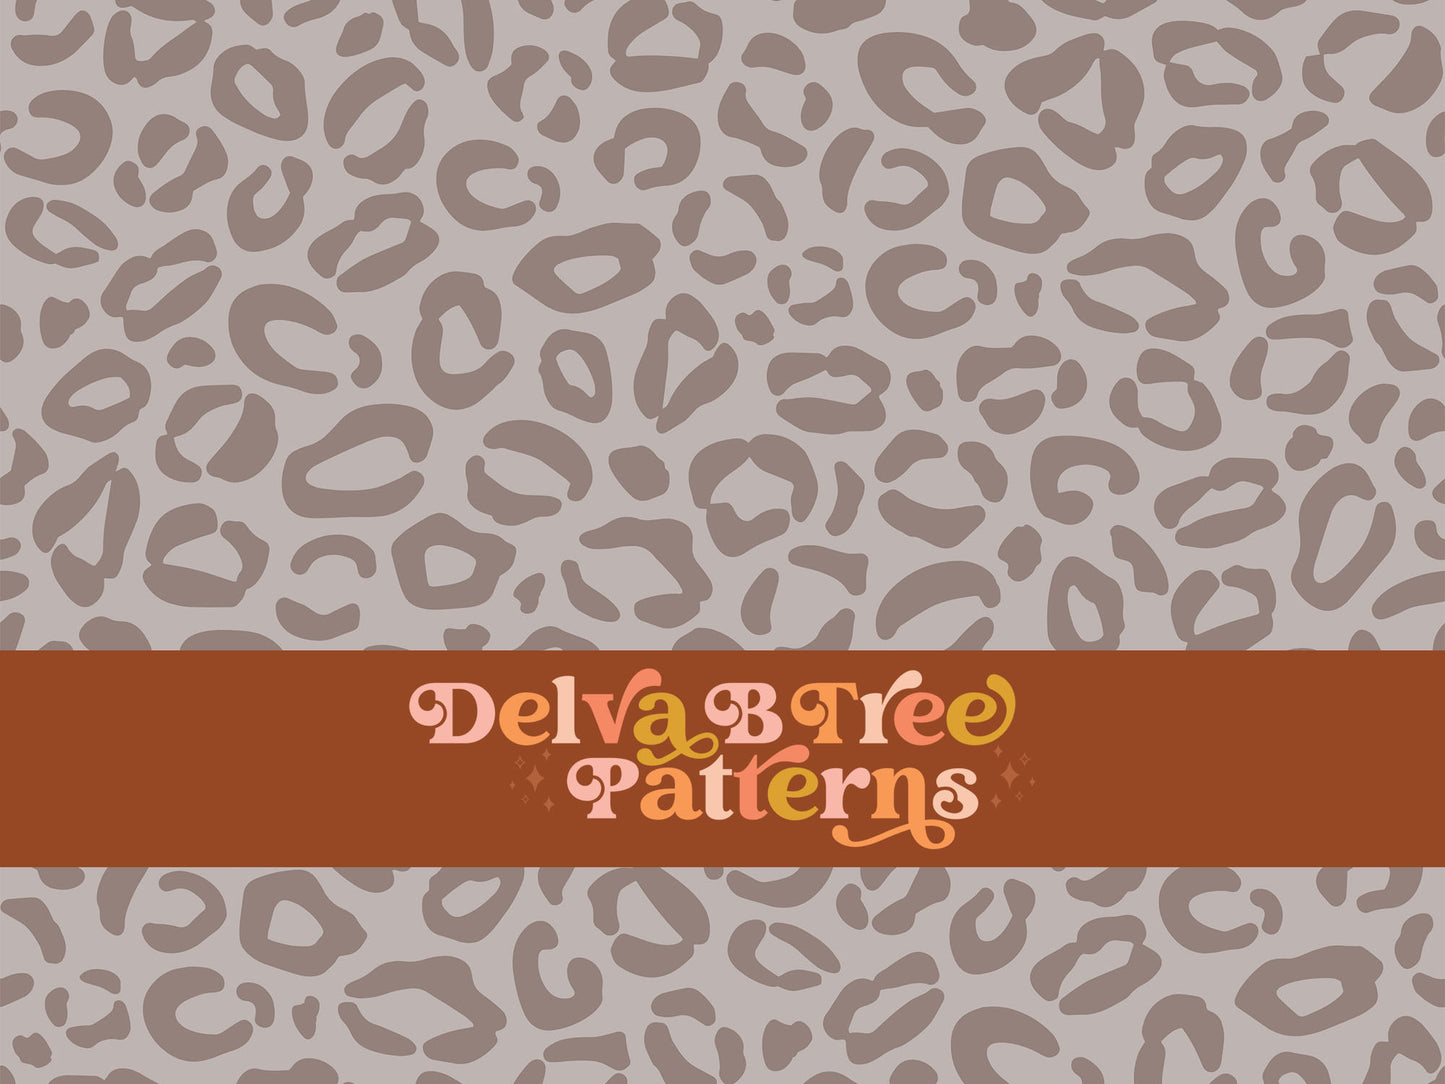 Tone on Tone beige gray taupe and cream leopard seamless file for fabric printing. Animal Skin Leopard Print Repeat Pattern for textiles, polymailers, baby boy lovey blankets, nursery crib bedding, kids clothing, girls hair accessories, home decor accents, pet products.